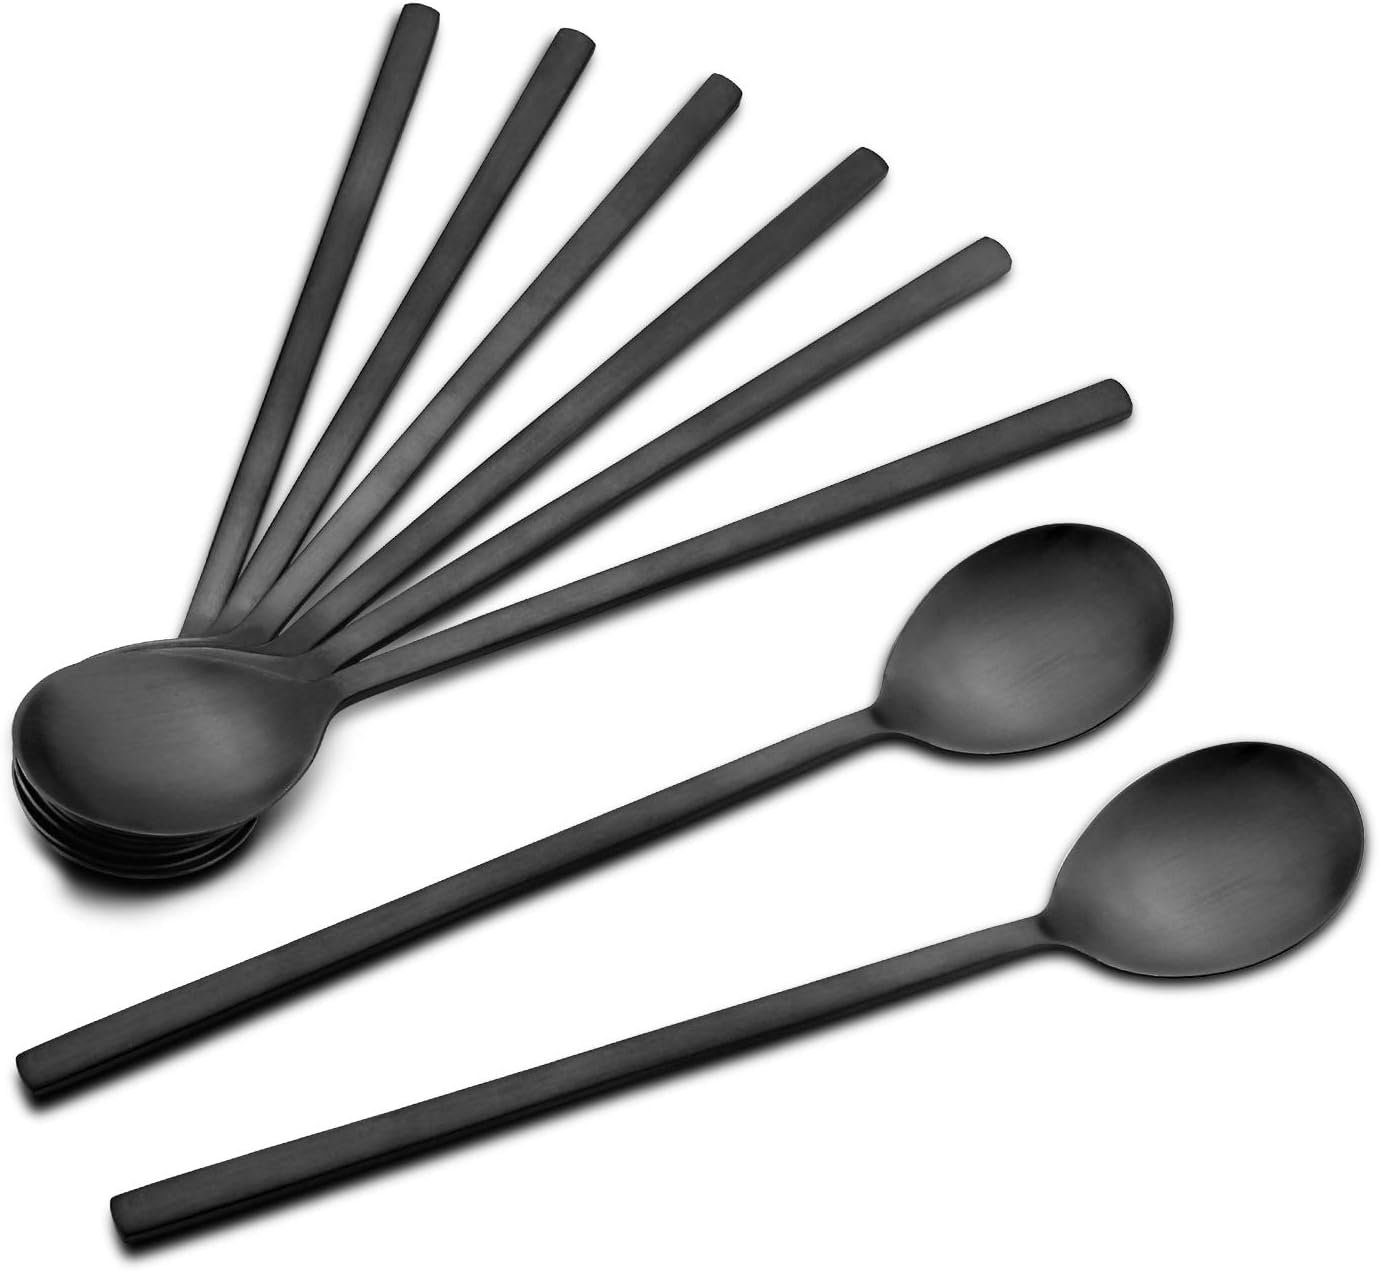 Spoons, 8 Pieces Stainless Steel Korean Spoons,8.5 Inch Soup Spoons, Korean Spoon with Long Handles, Rice Spoon, Asian Soup Spoon for Home, Kitchen, or Restaurant